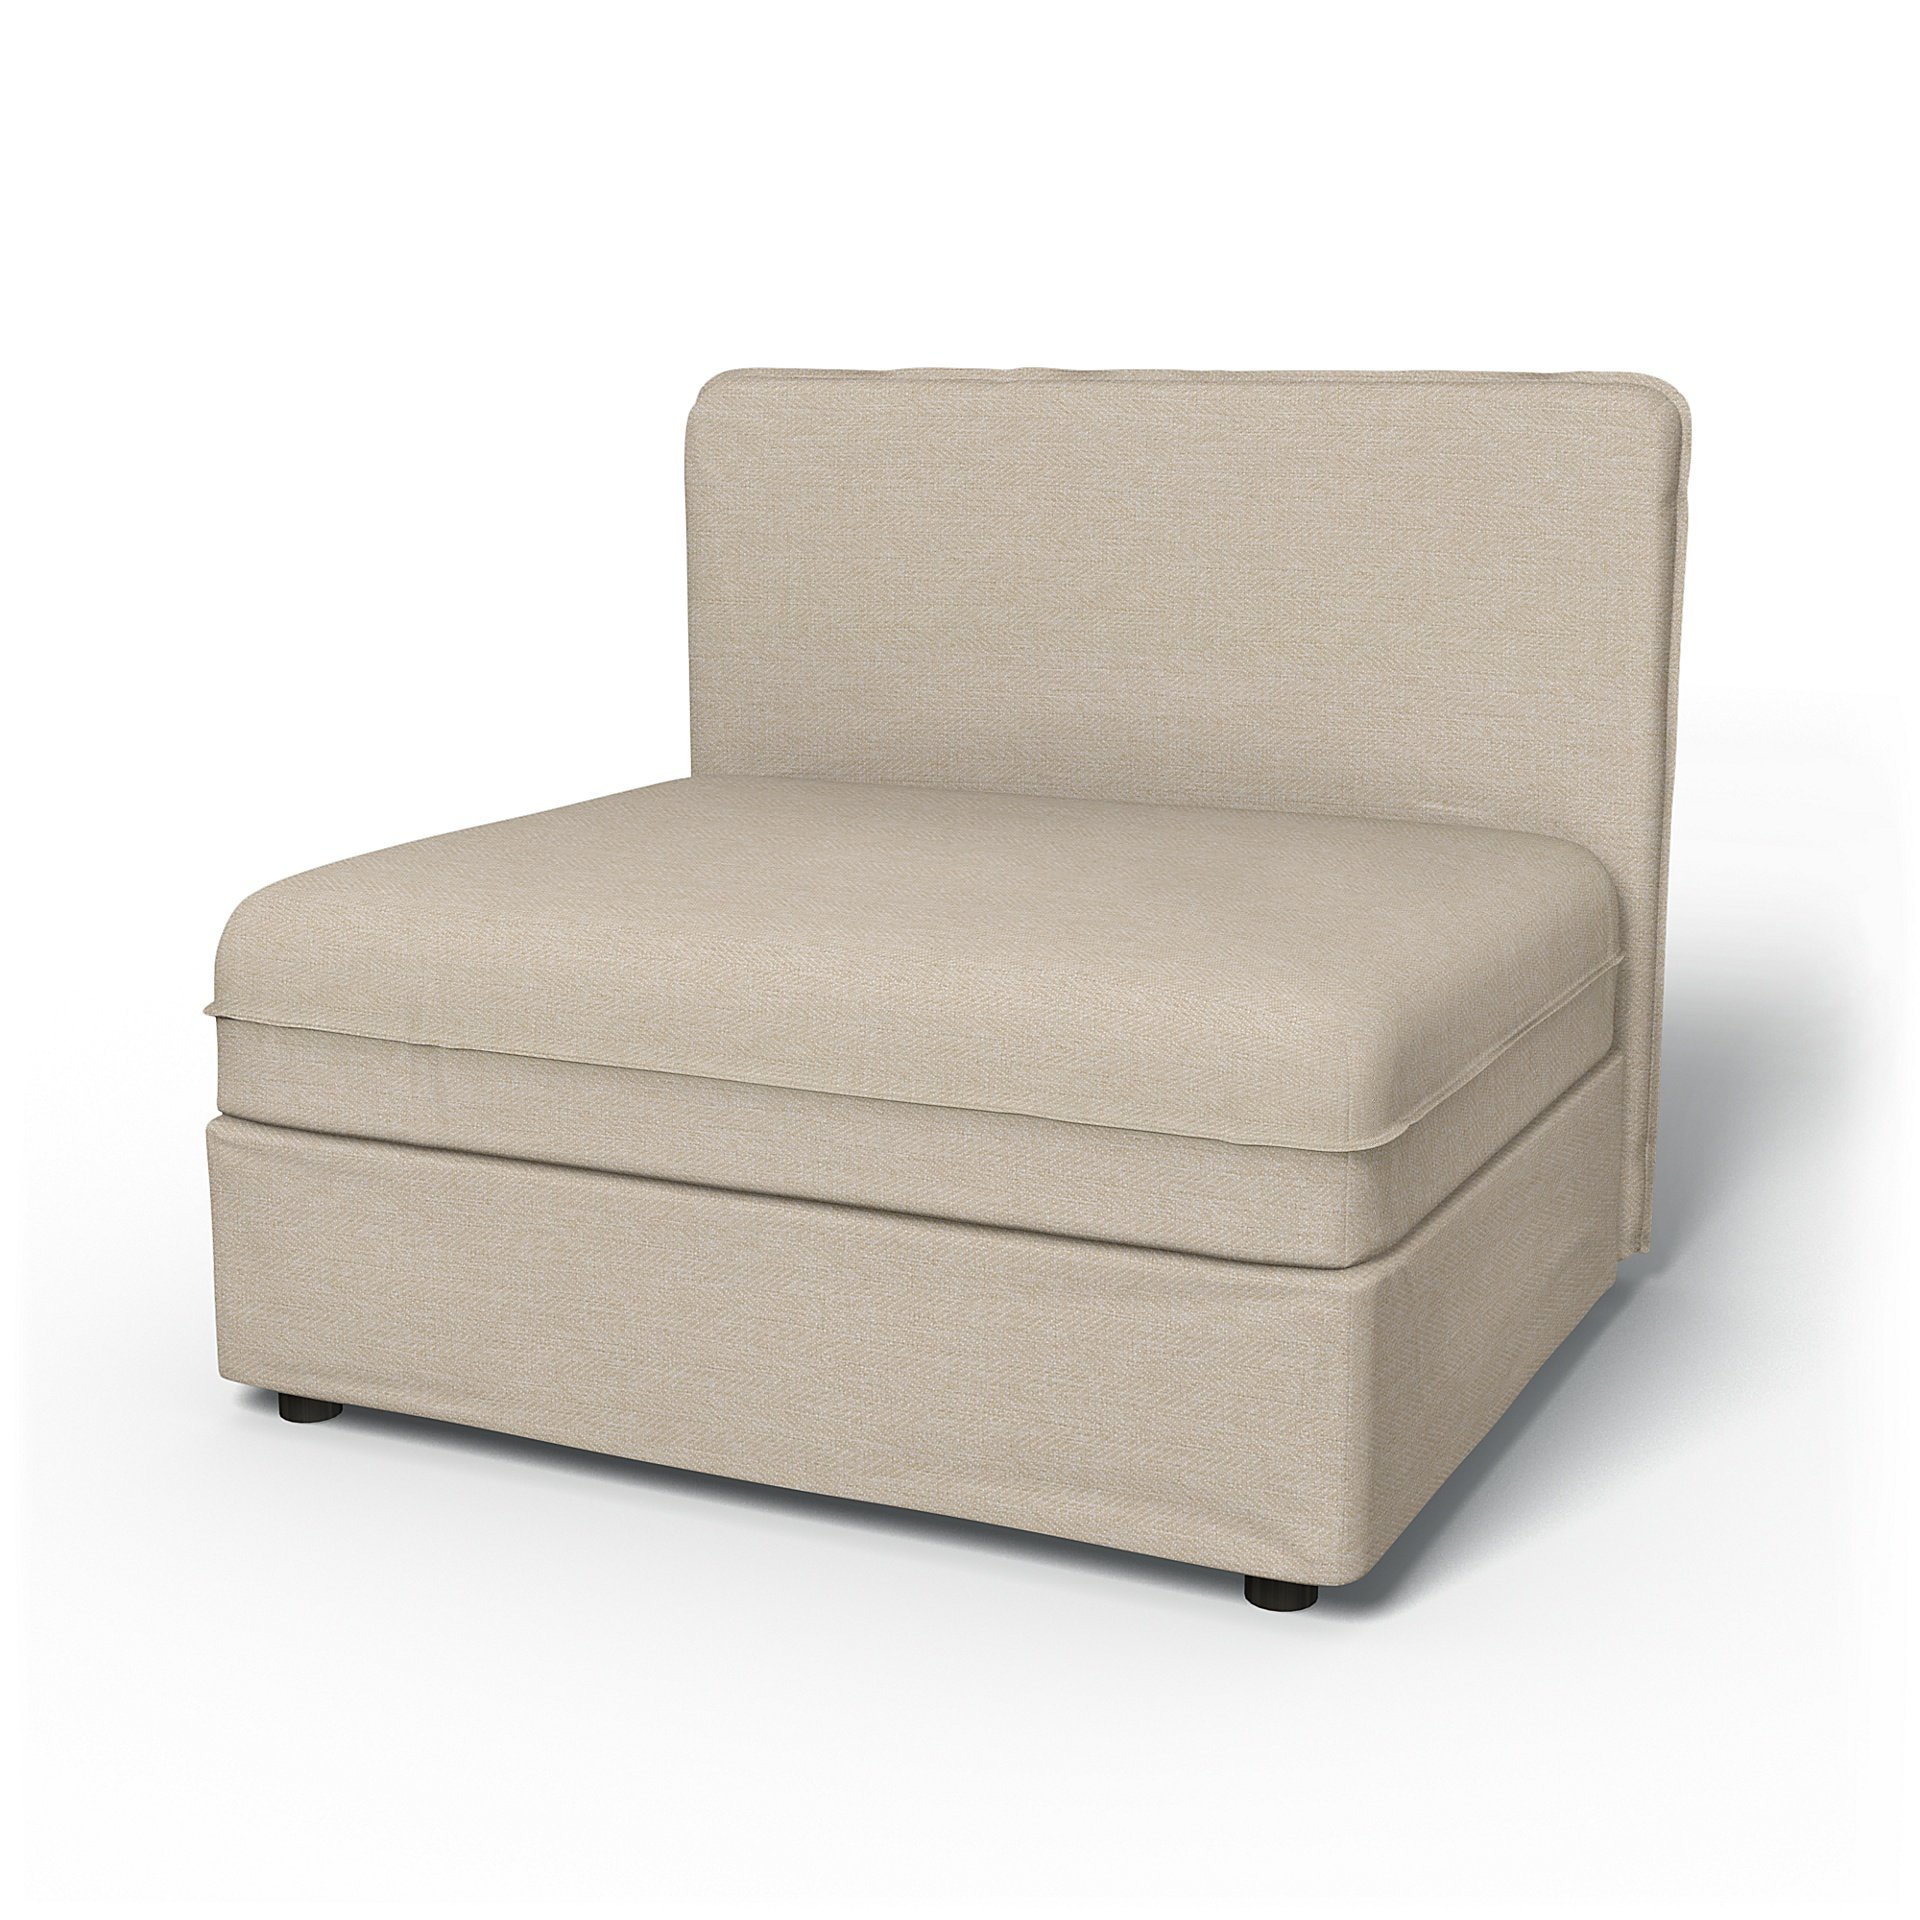 IKEA - Vallentuna Seat Module with Low Back Cover 100x80cm 39x32in, Natural, Boucle & Texture - Bemz